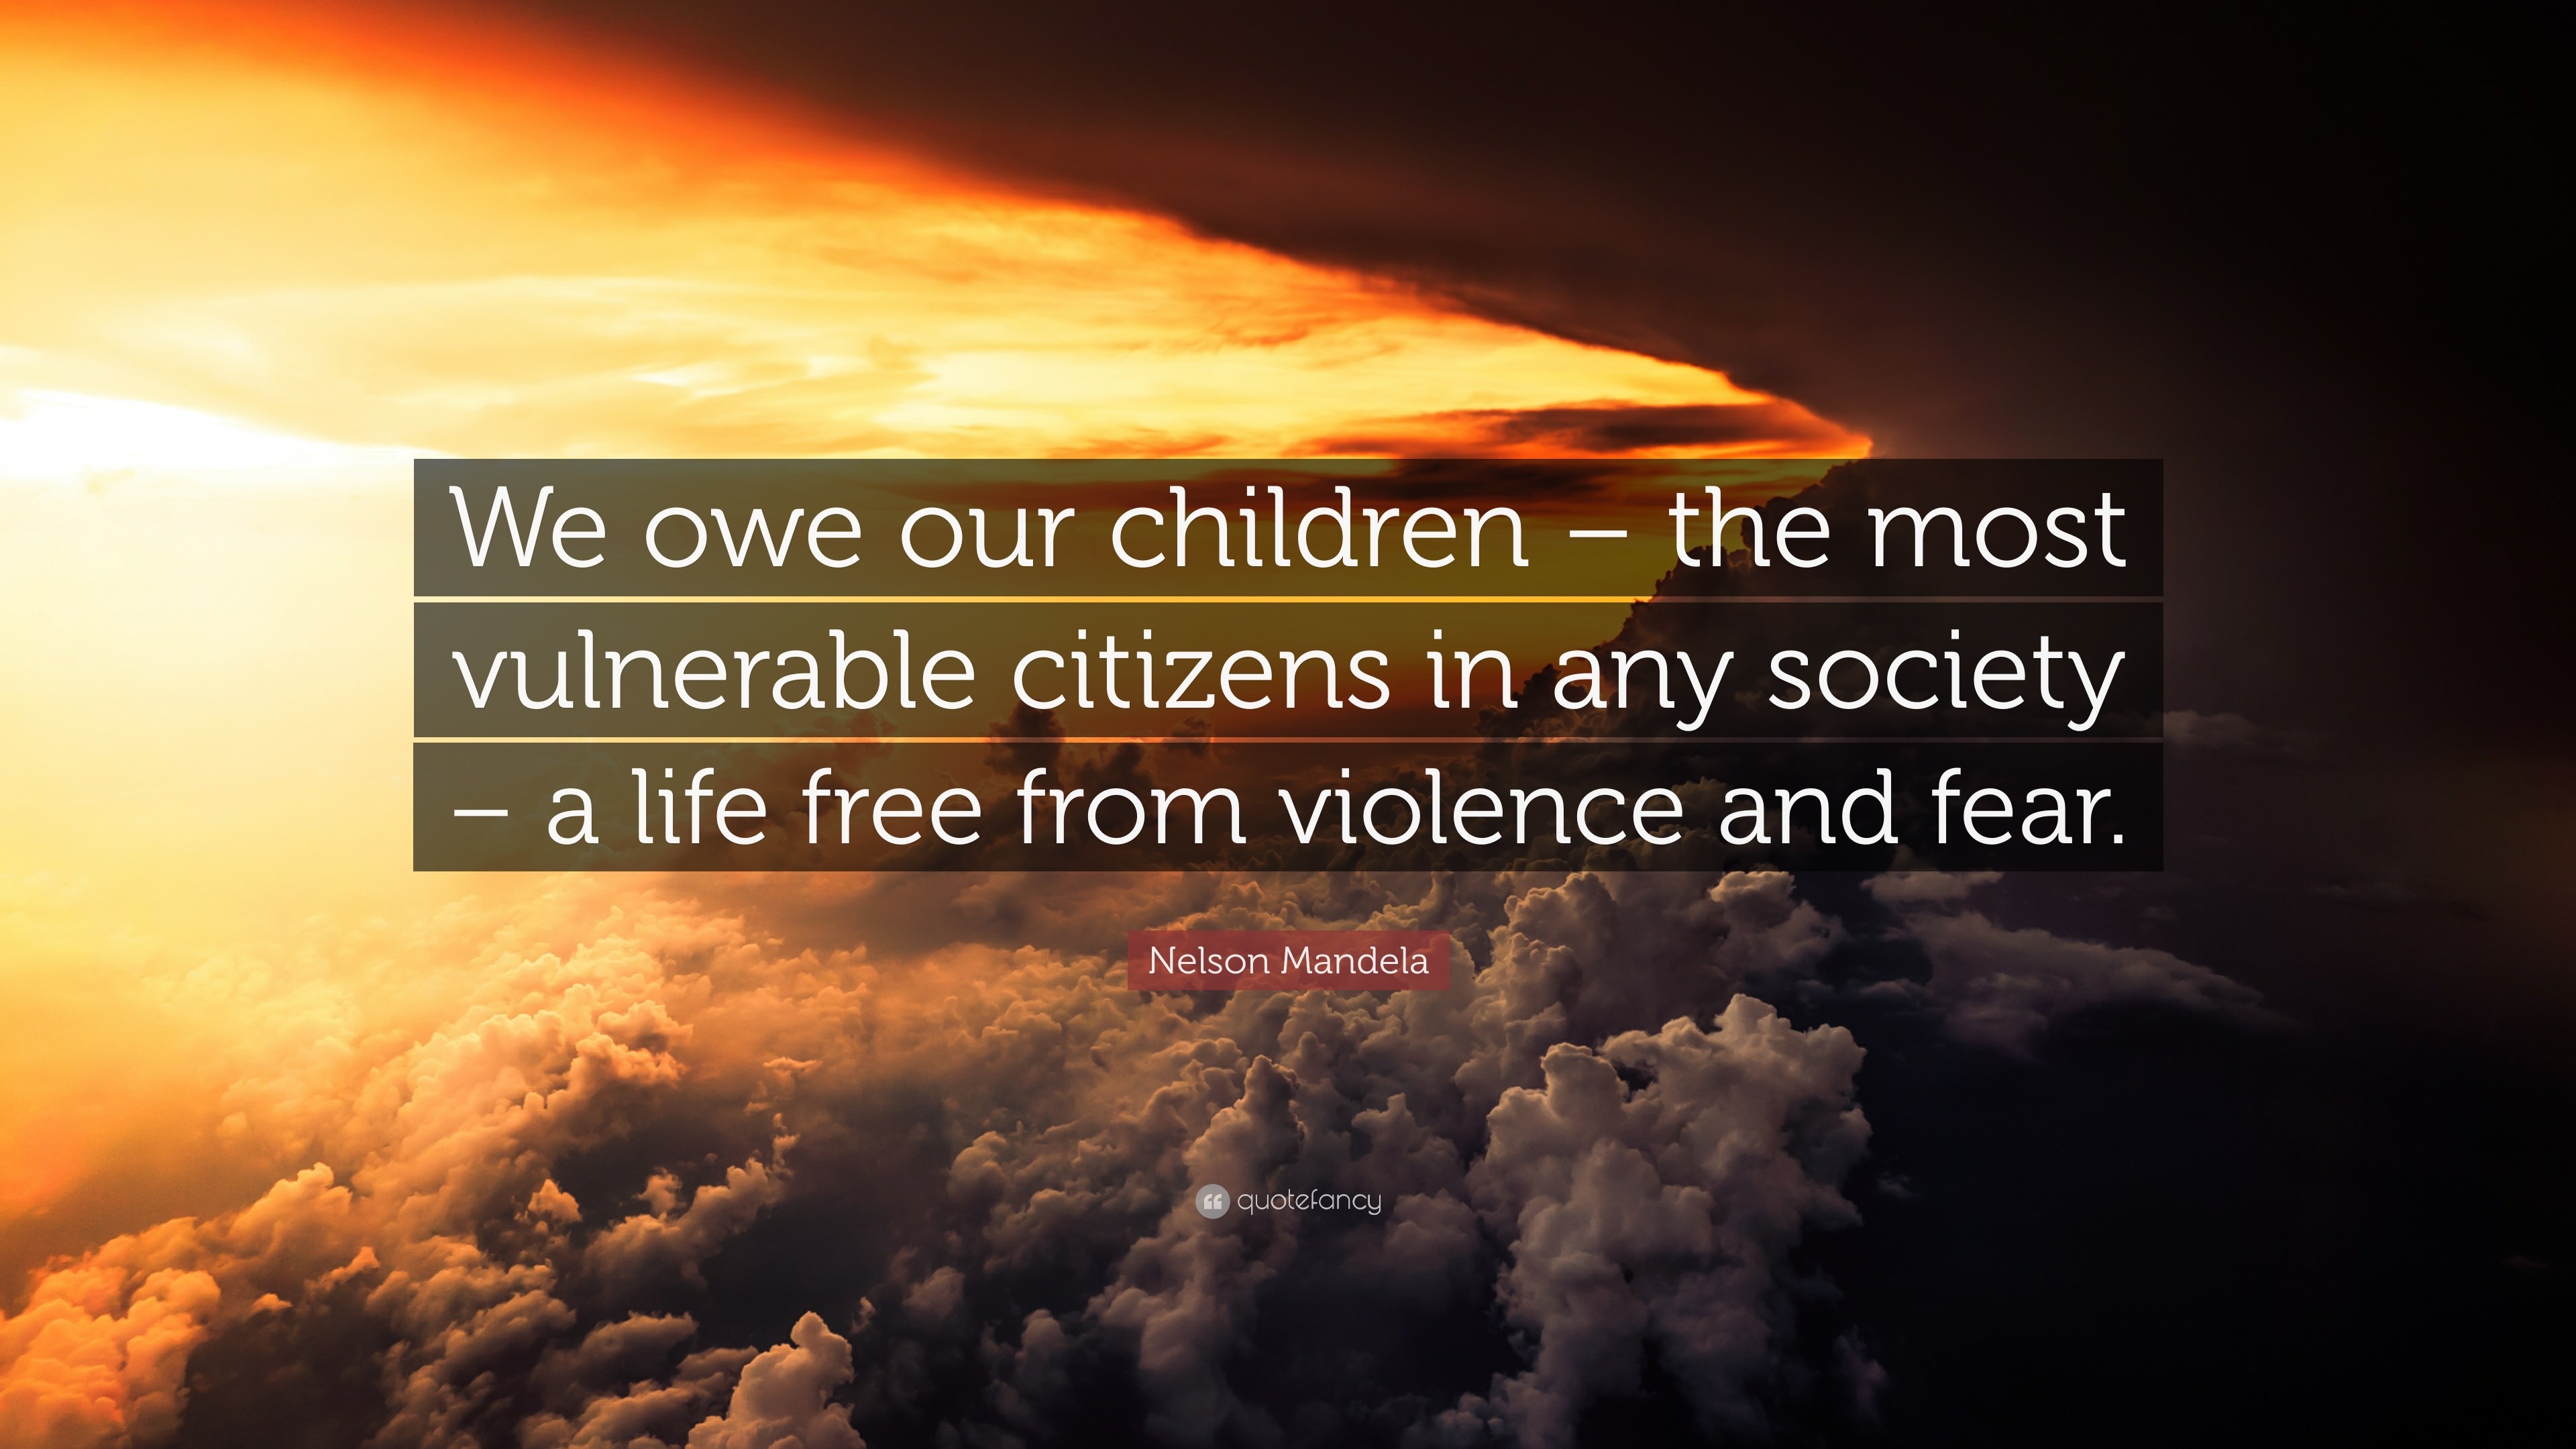 Nelson Mandela Quote: “We owe our children – the most vulnerable